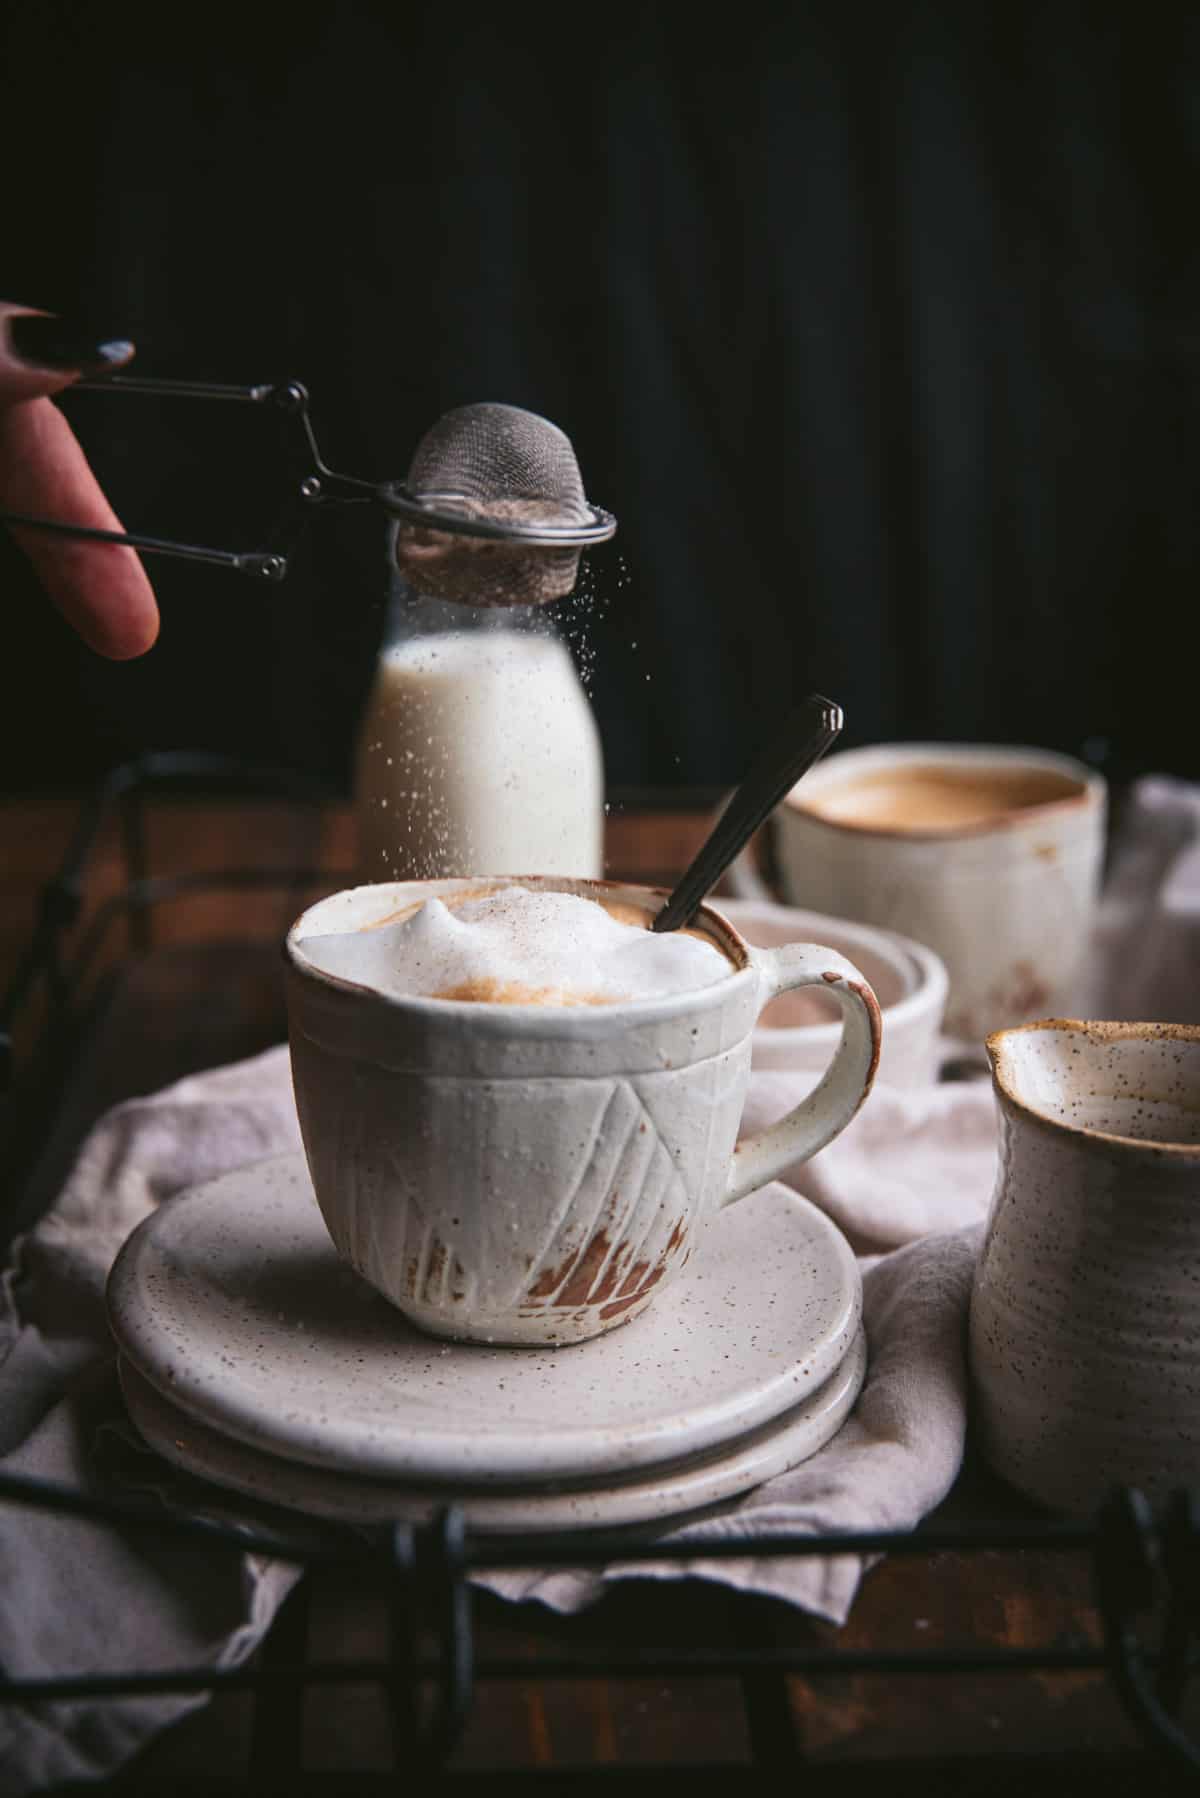 Tea strainer sprinkling maple sugar over frothy milk on top of a maple latte.  The mug is stacked on two ceramic plates.